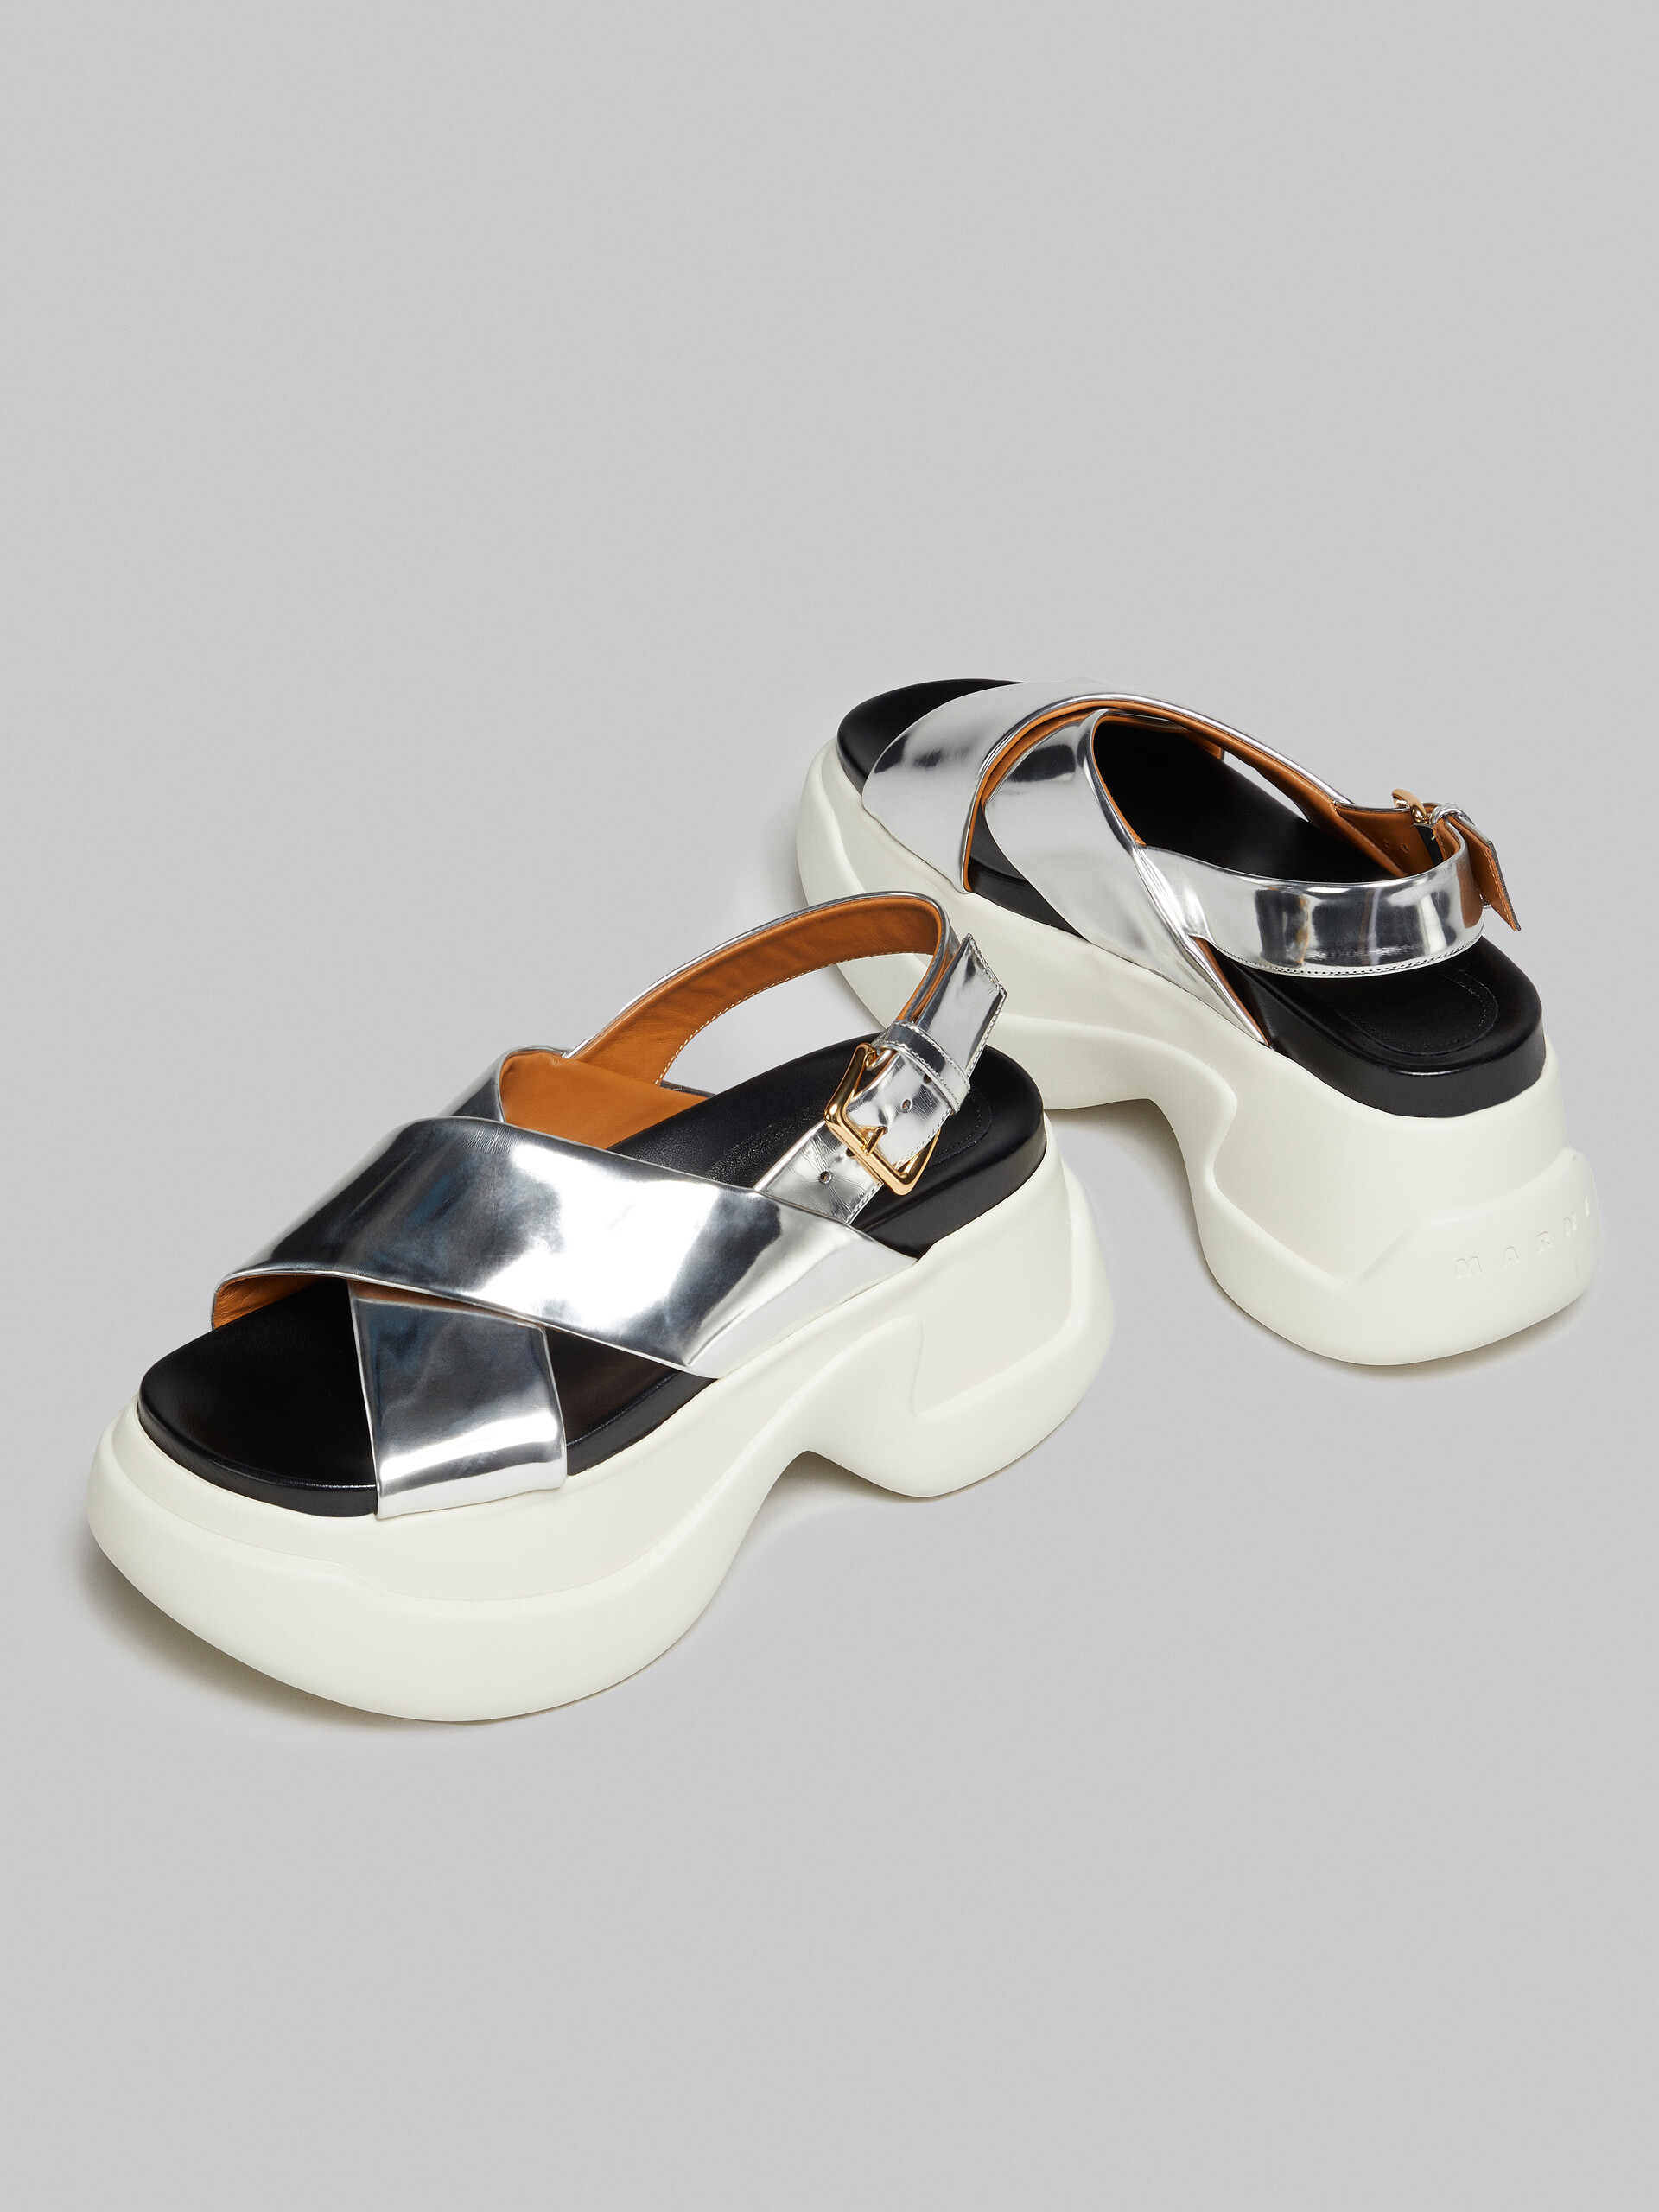 Silver mirrored leather Fussbett - Sandals - Image 5